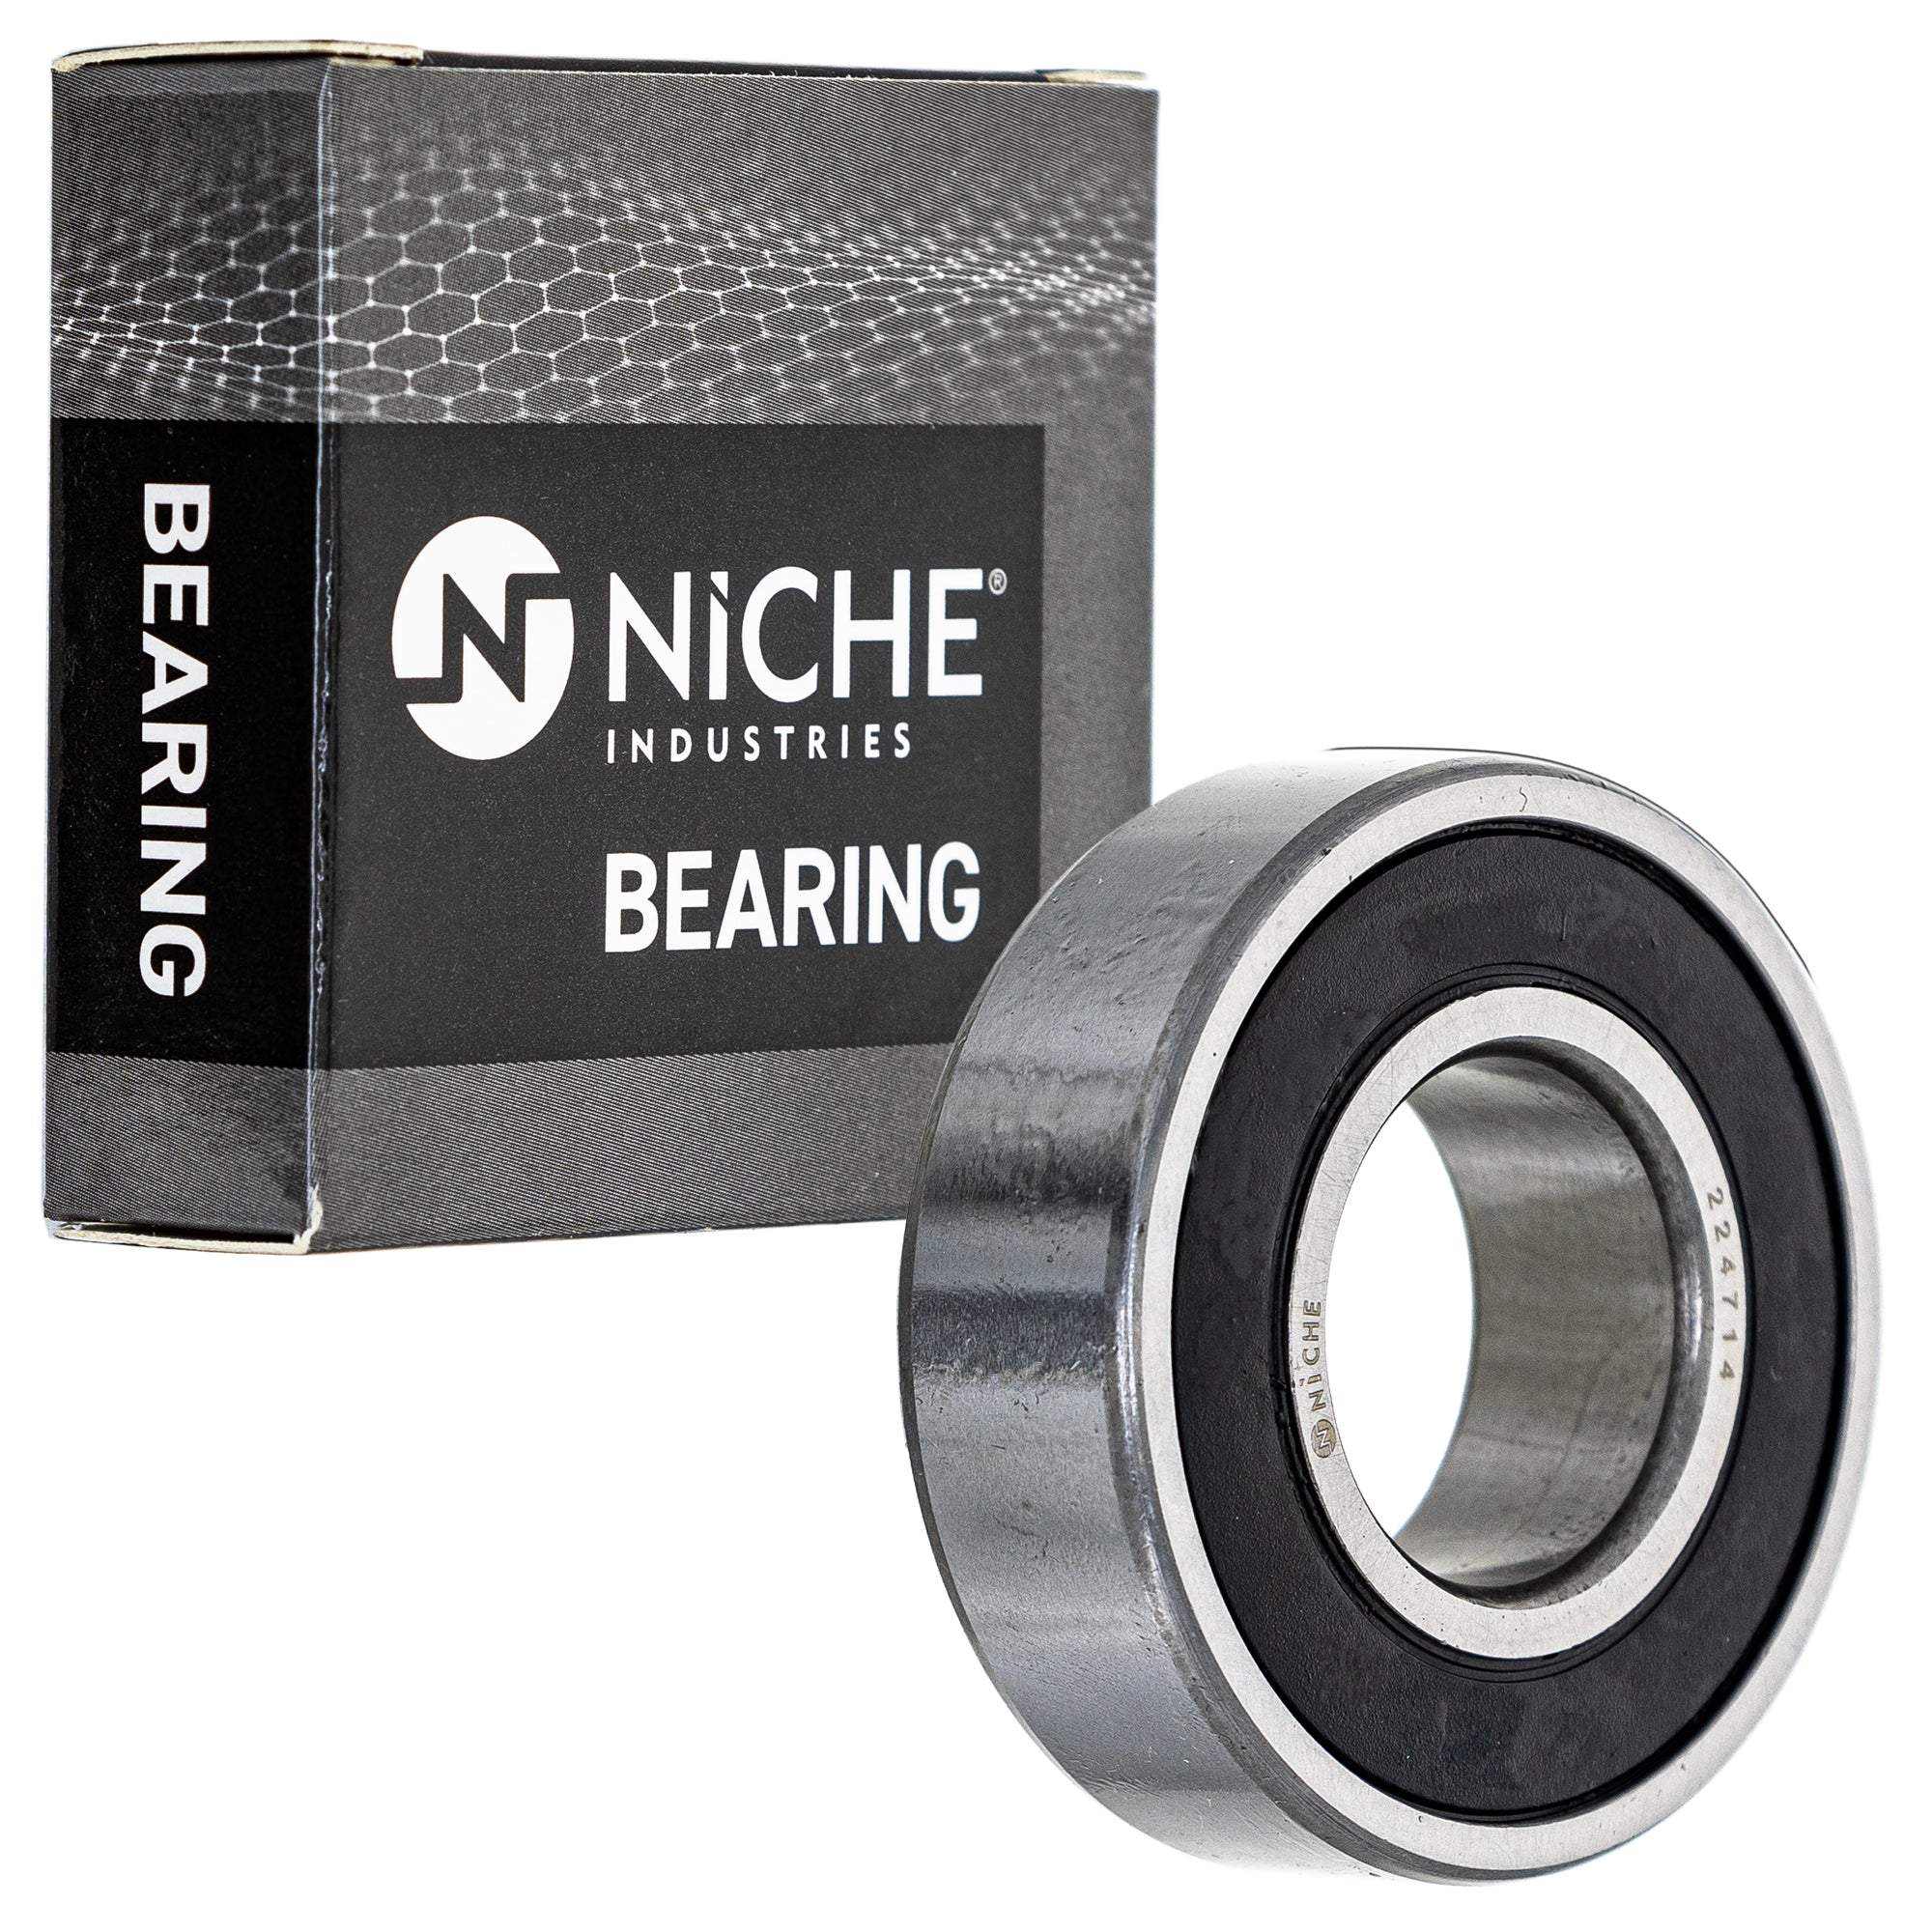 NICHE 519-CBB2217R Bearing for zOTHER Silver RC51 FourTrax CBR600RR